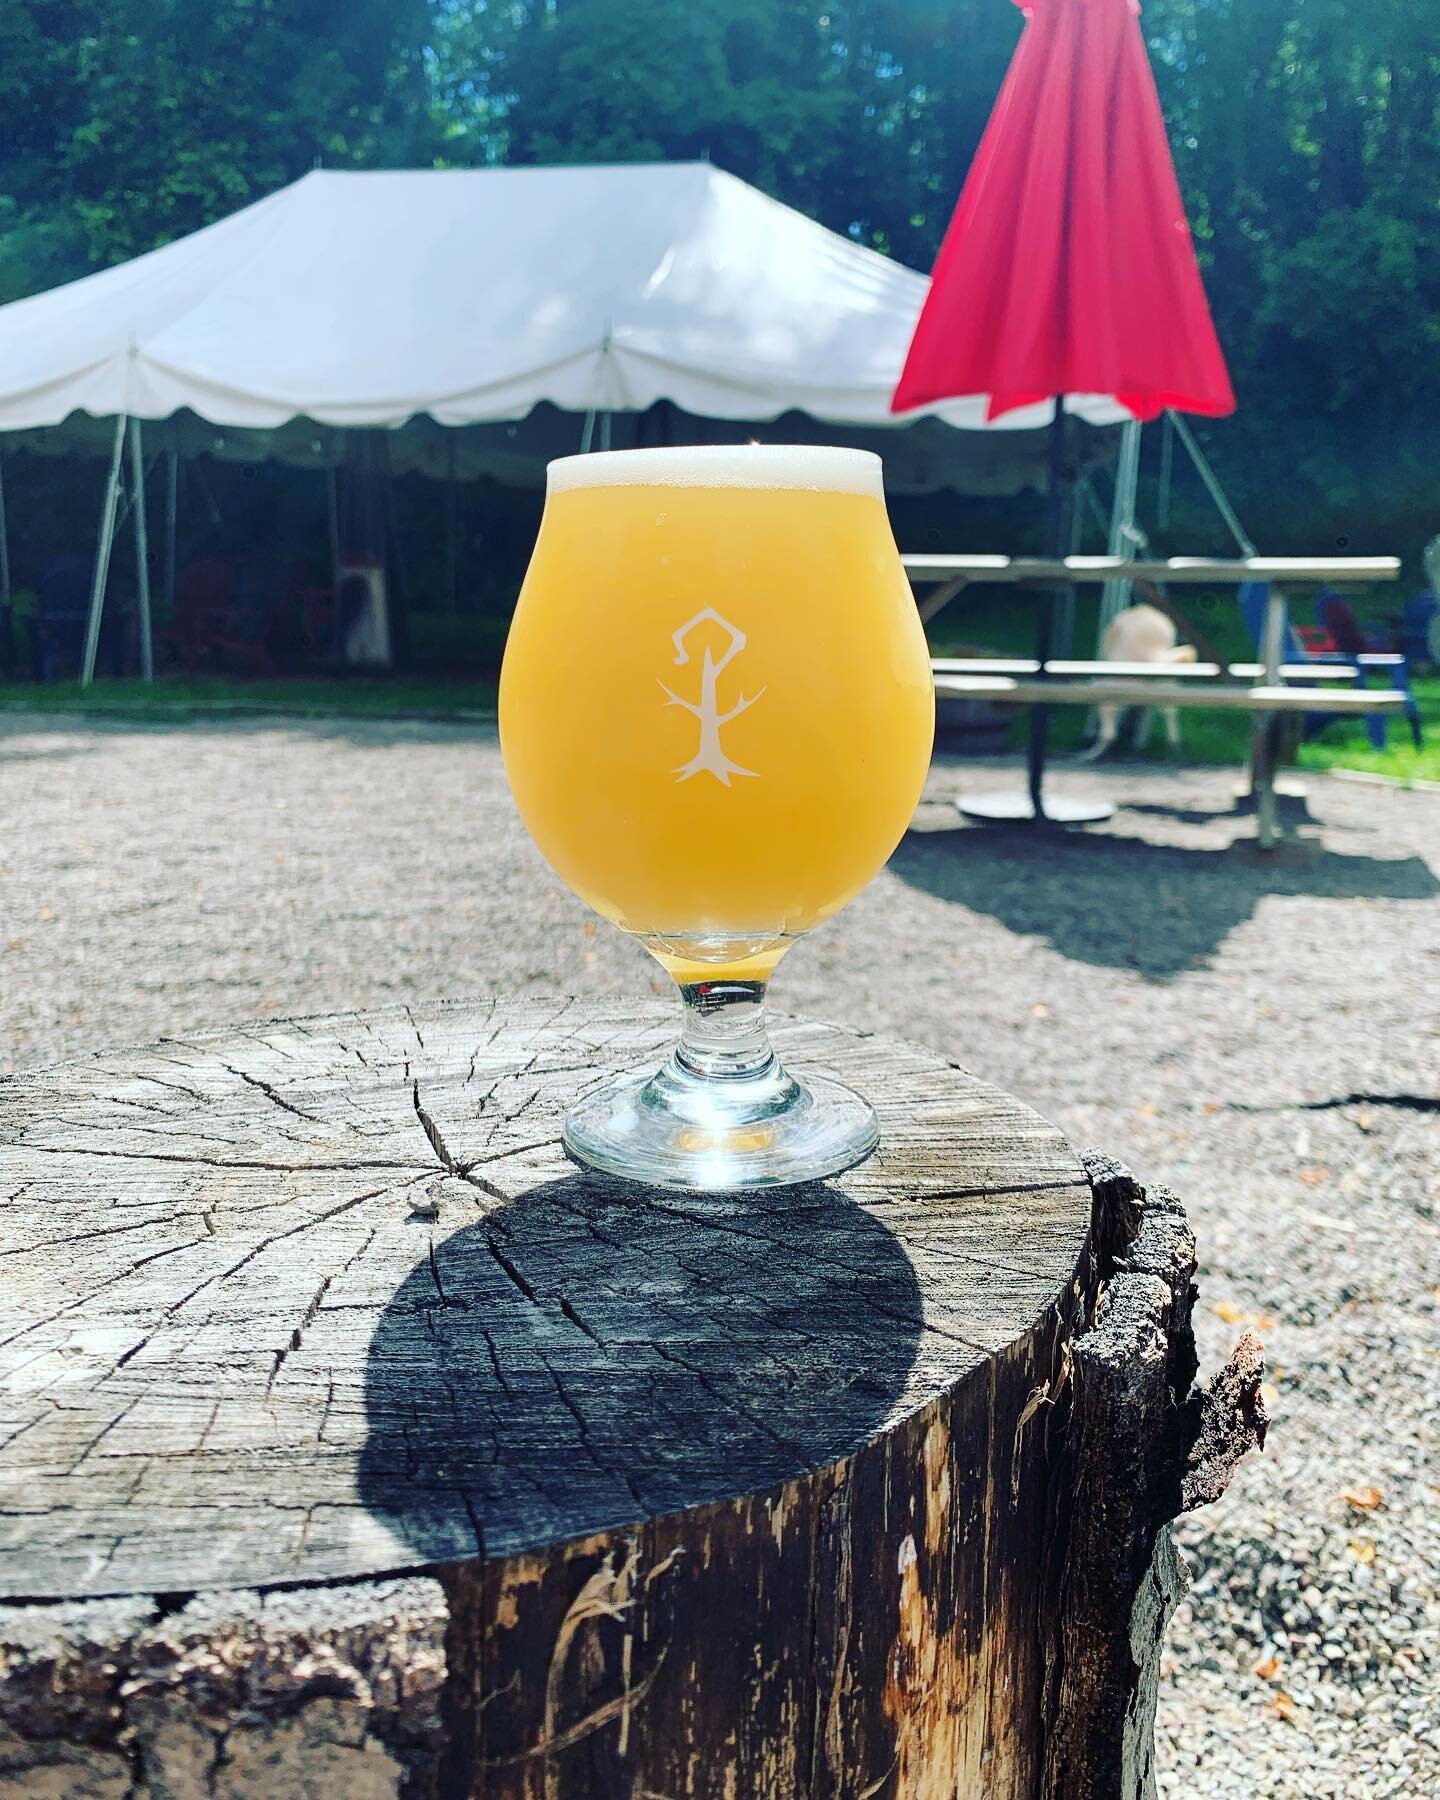 Open 12-9 today!

Kids Menu NEIPA Part 2 is on tap! A low ABV hazy IPA double dry hopped with Citra, Sabro &amp; Nelson Sauvin. 4.8% ABV

No Pad Thai Catering today BUT we do have the fine folks of FLX Hots serving up some tasty food from 6-8 today a